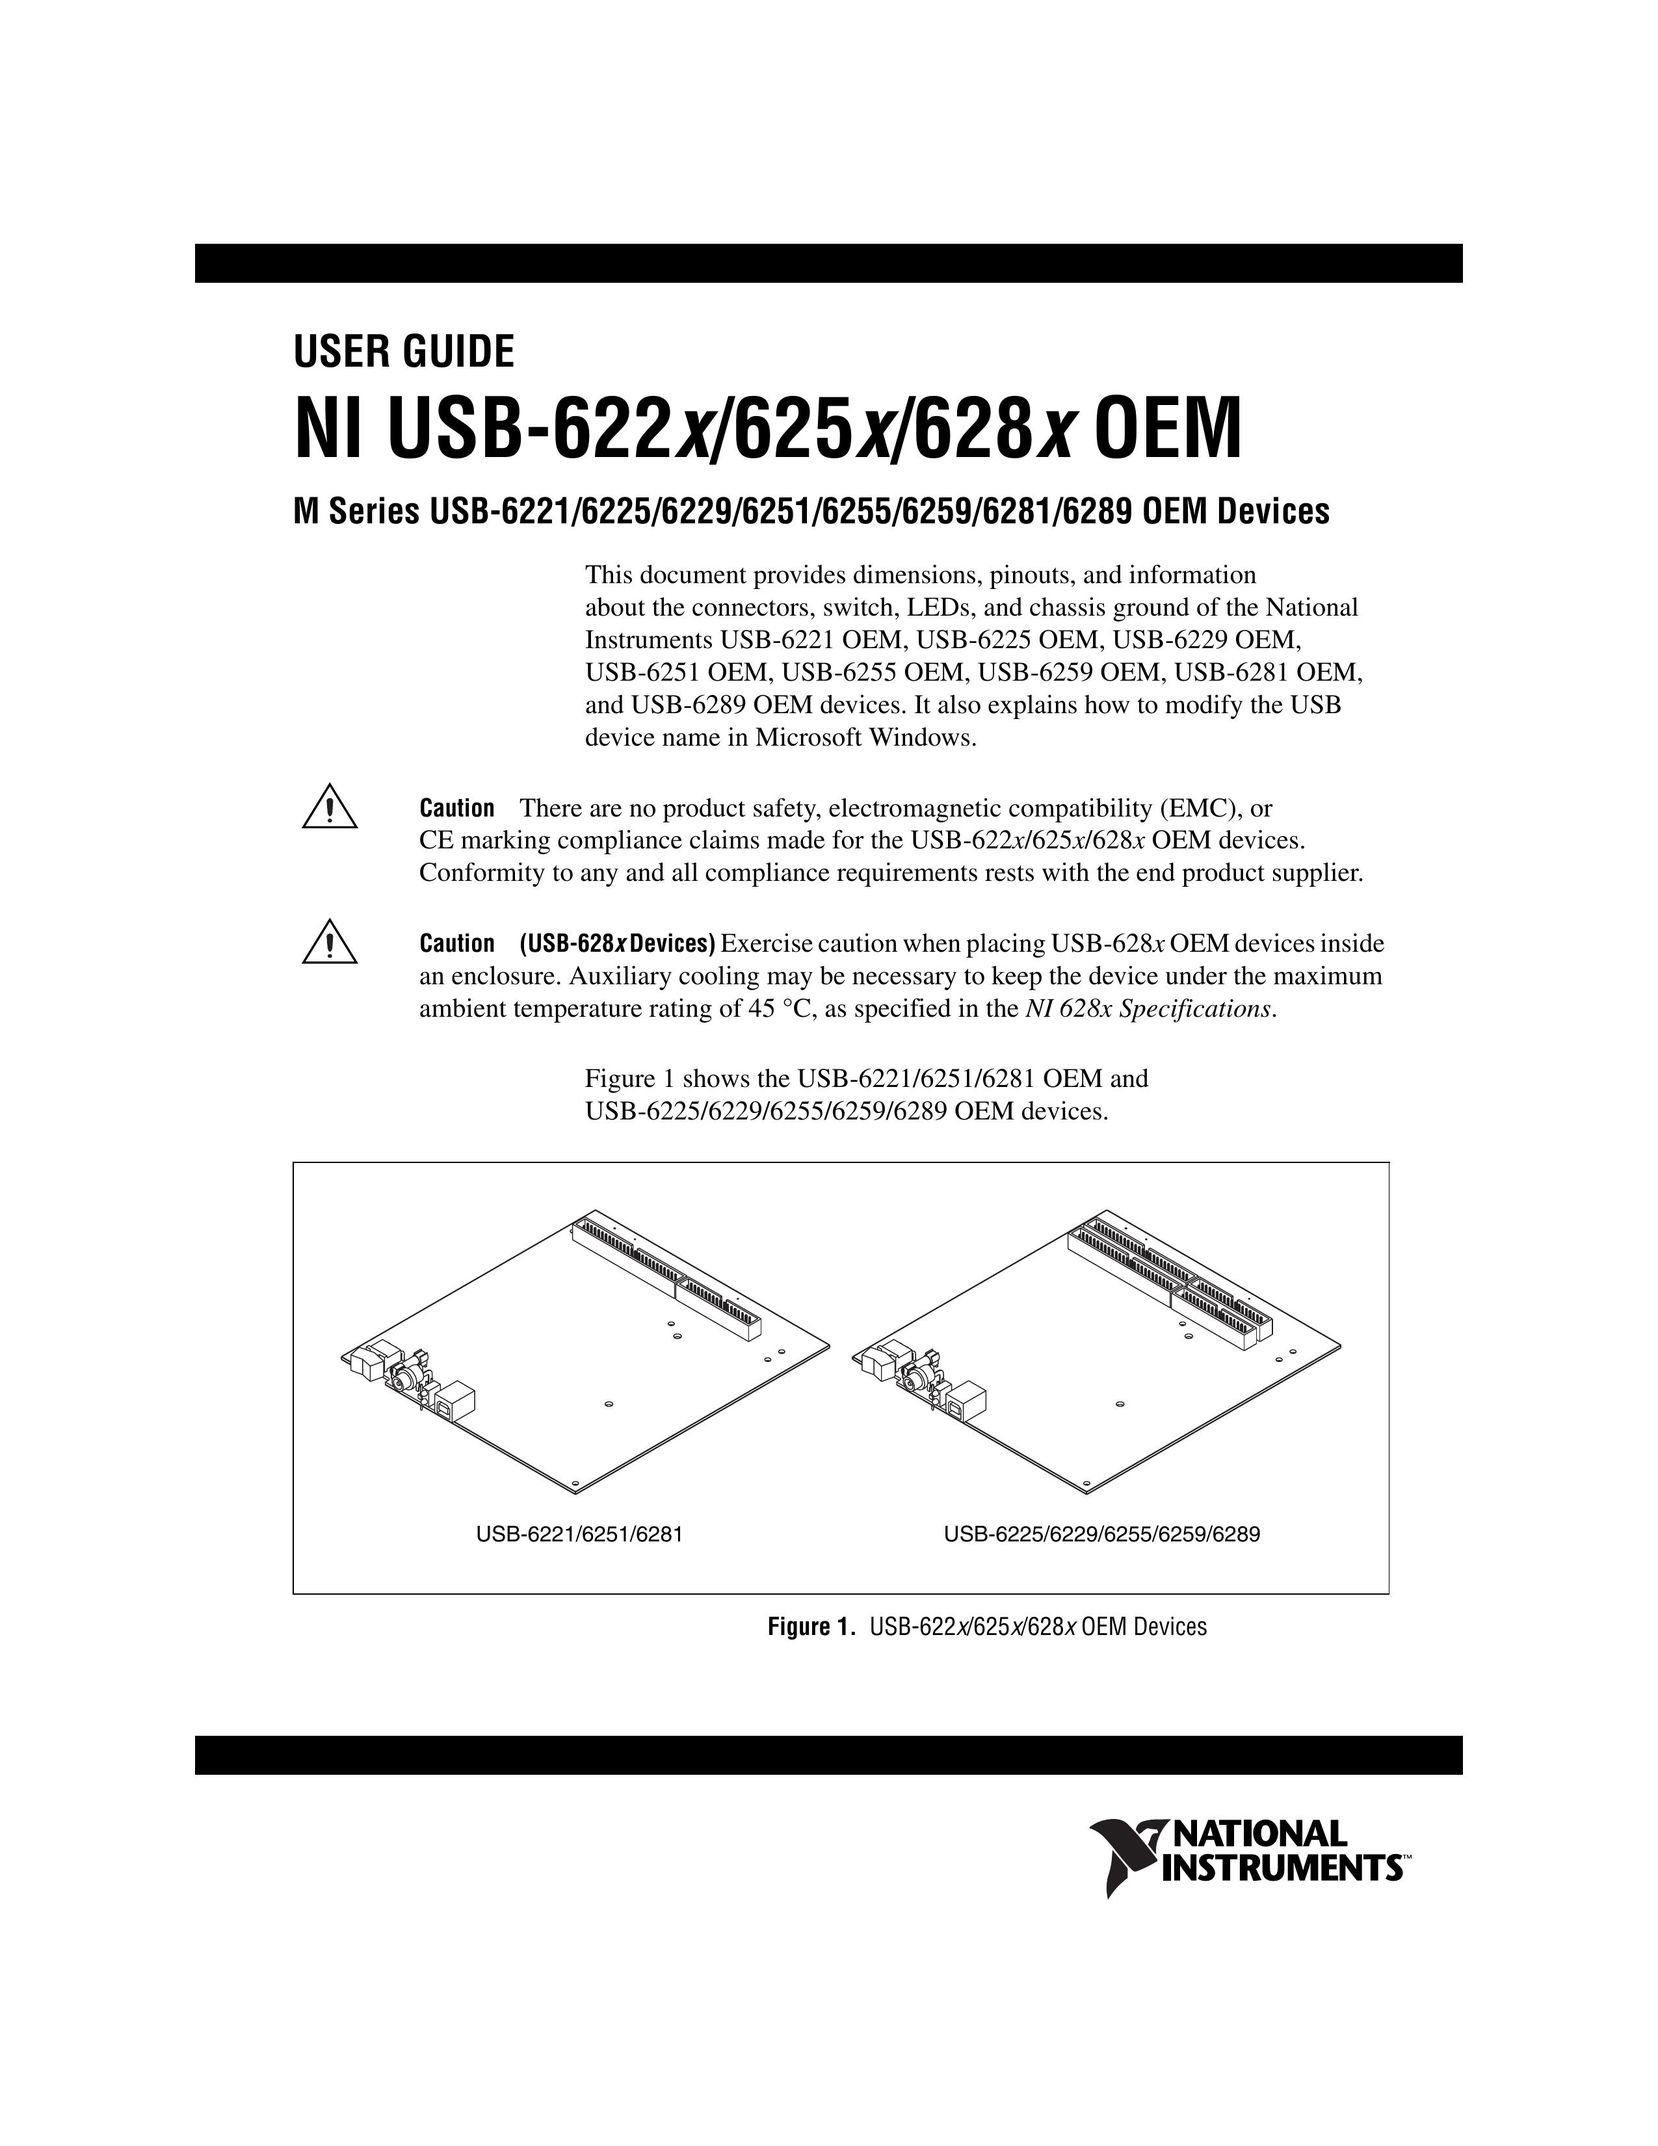 National Instruments 622x Computer Drive User Manual